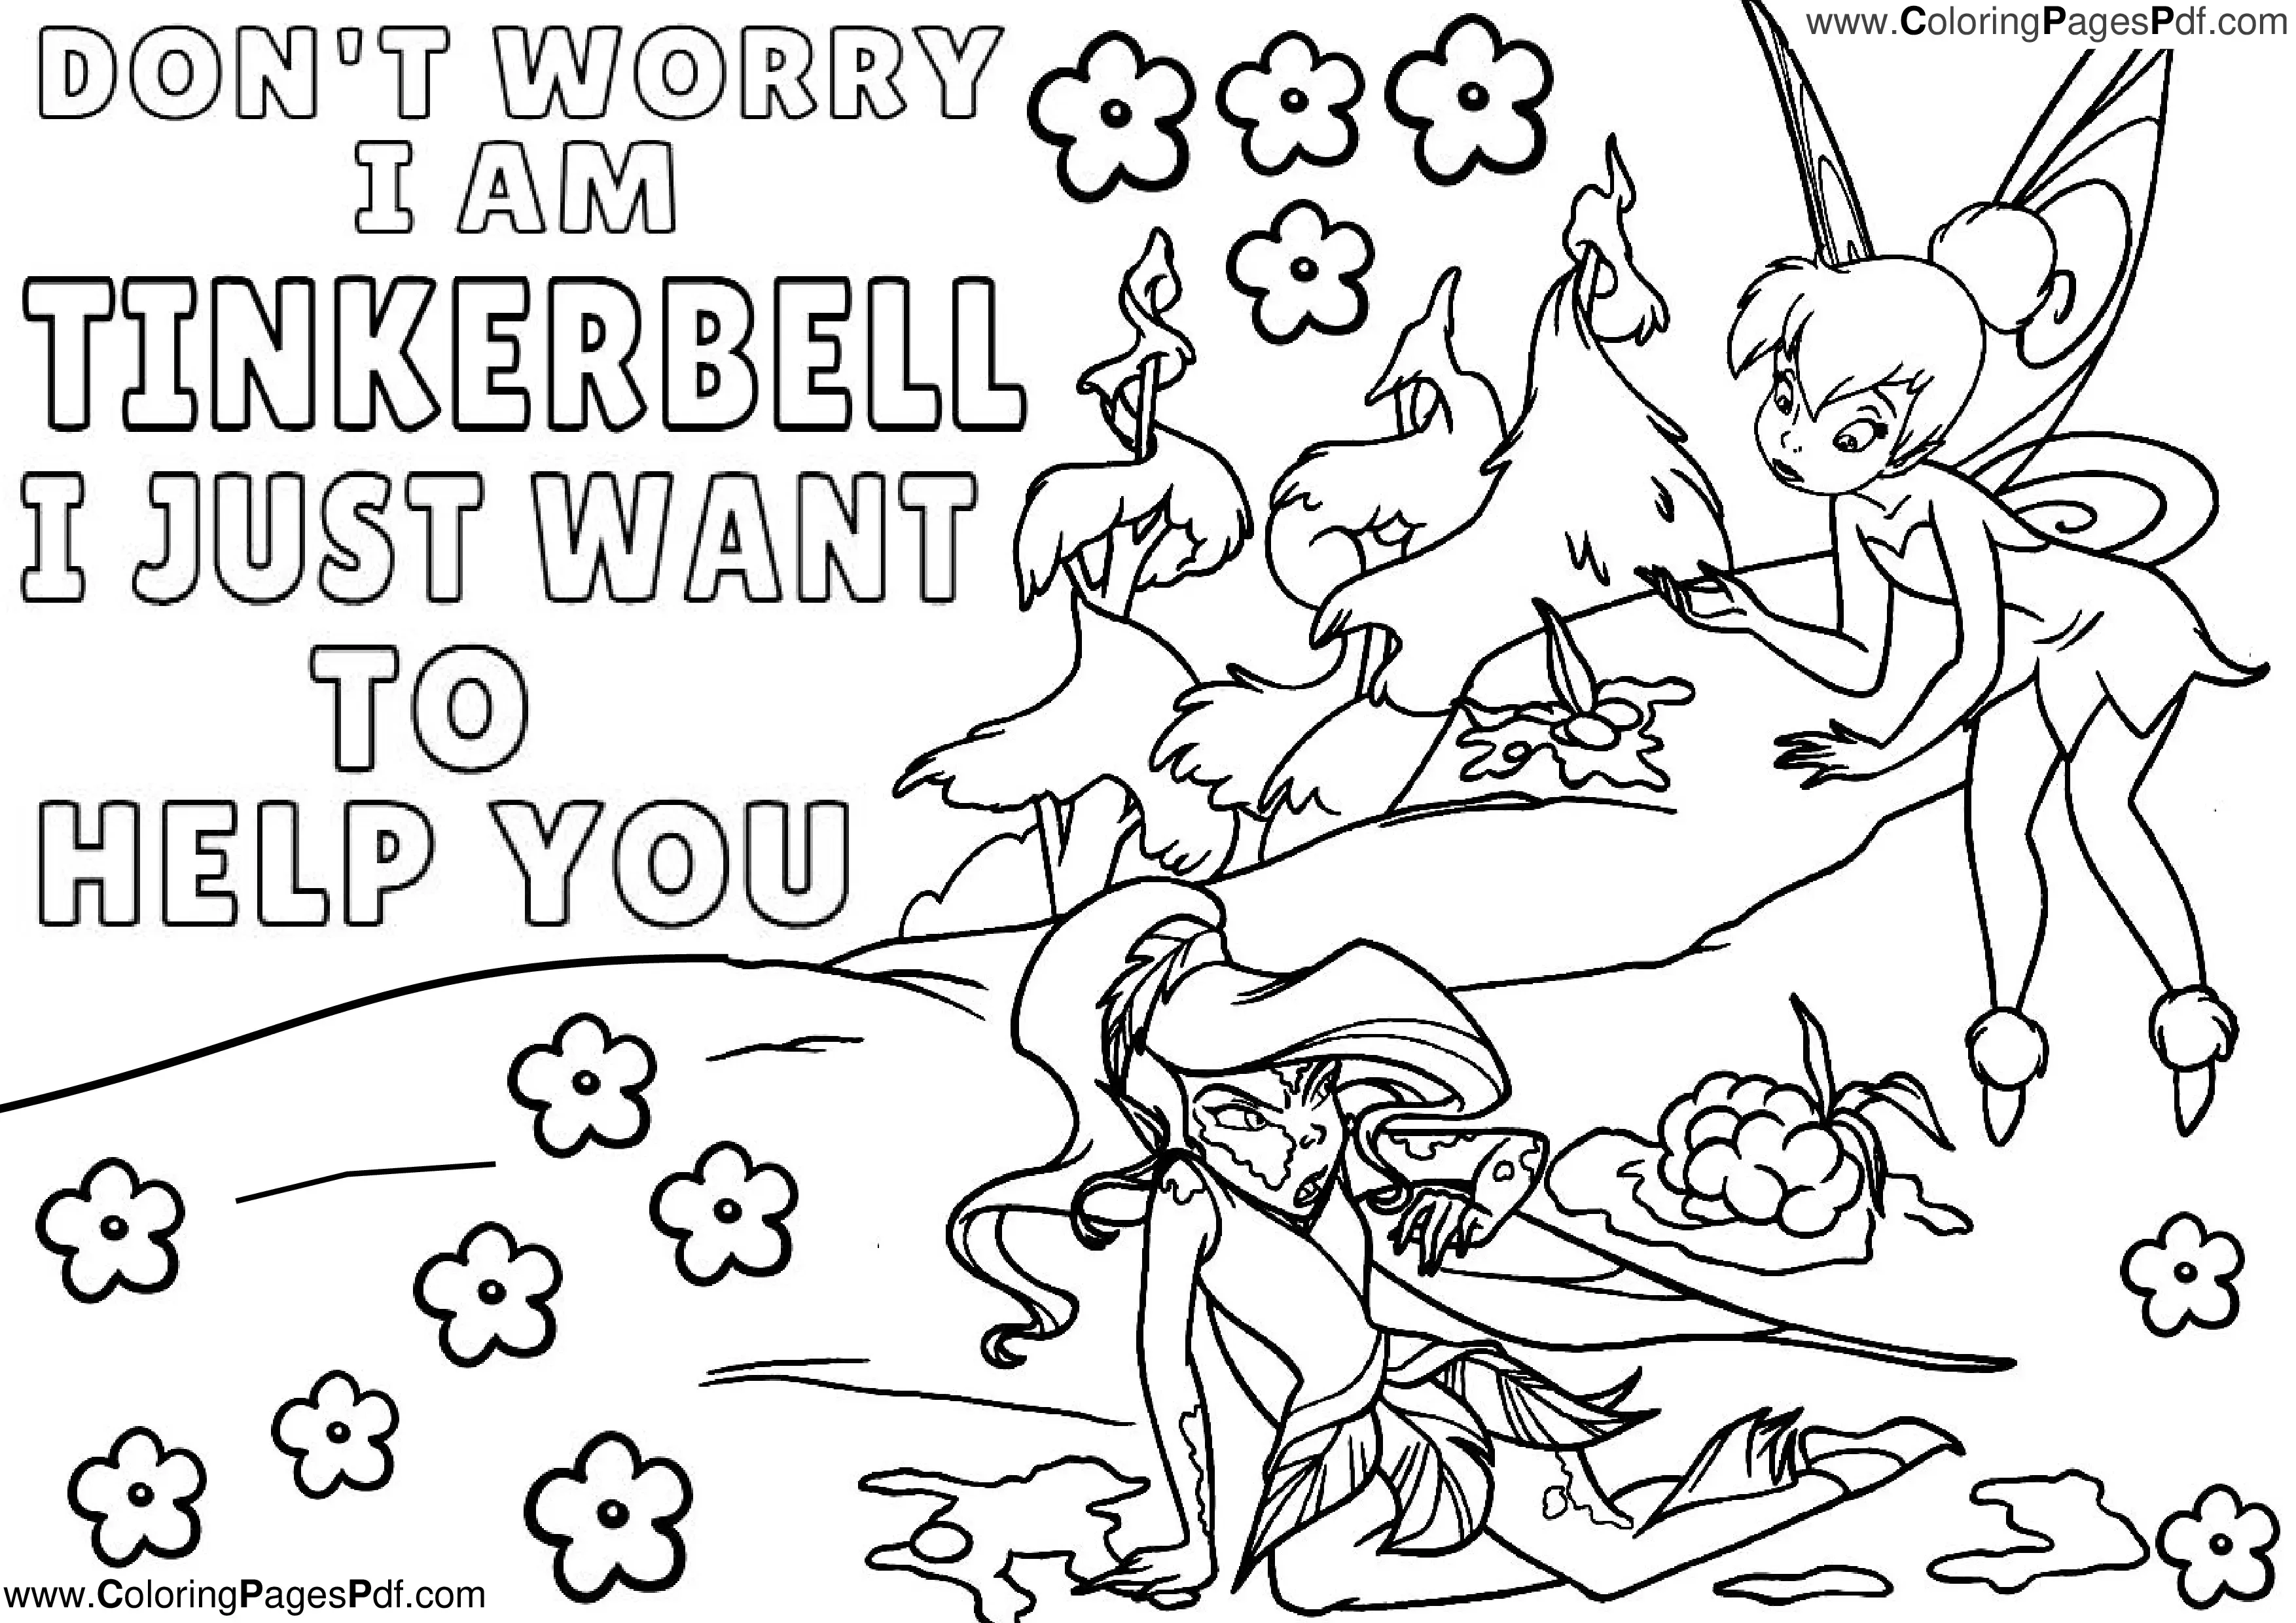 Coloring pages of tinkerbell